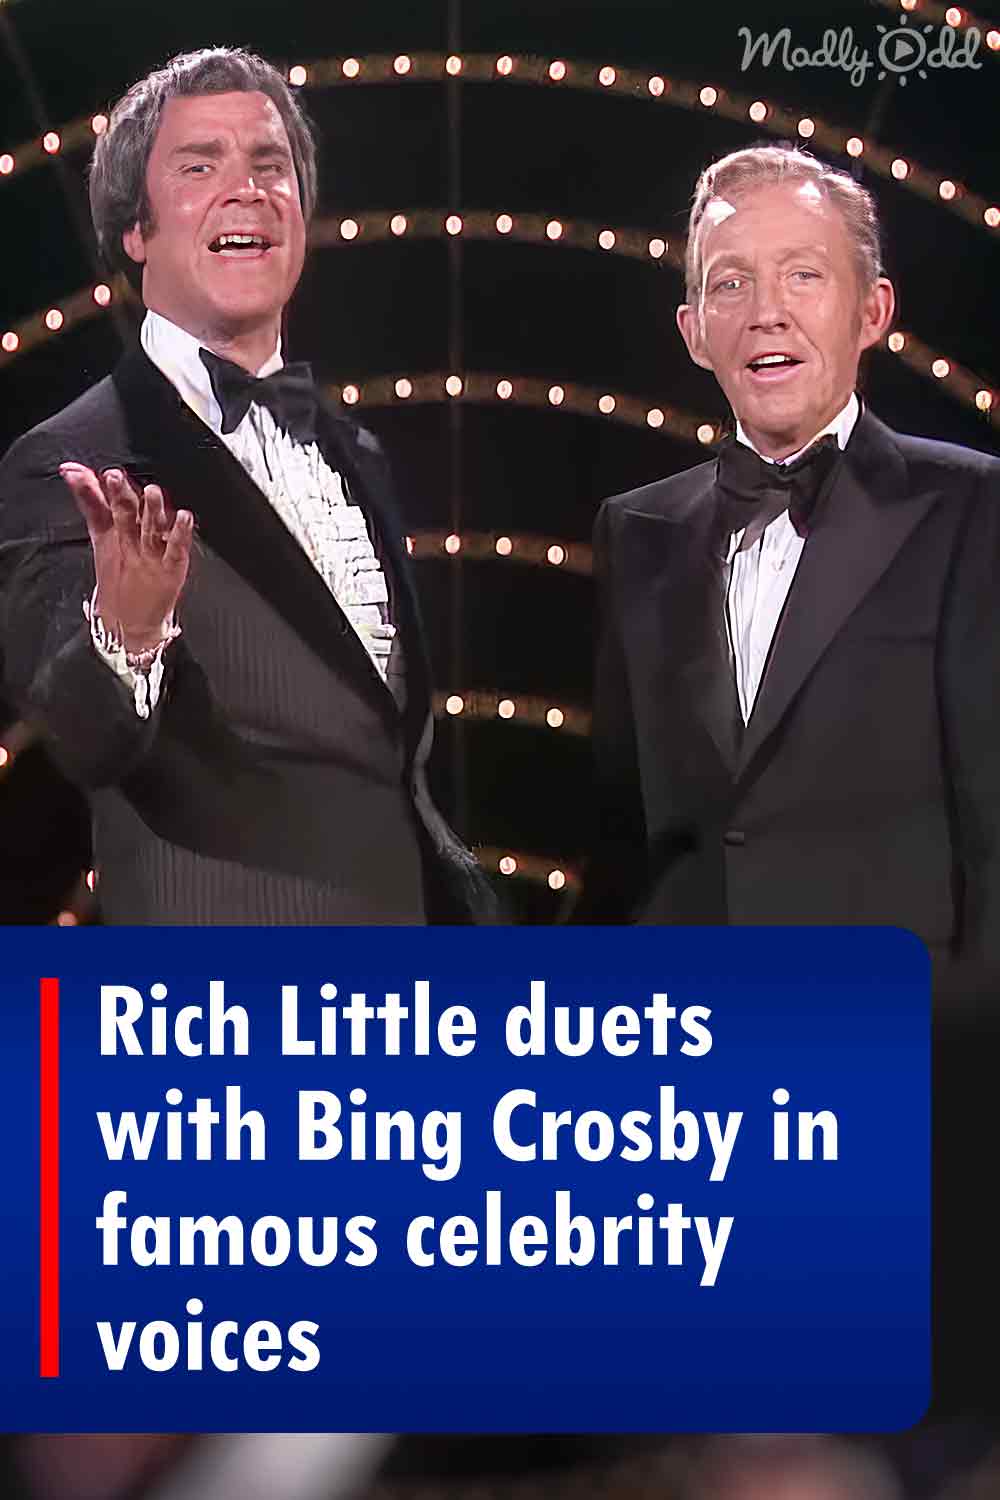 Rich Little duets with Bing Crosby in famous celebrity voices